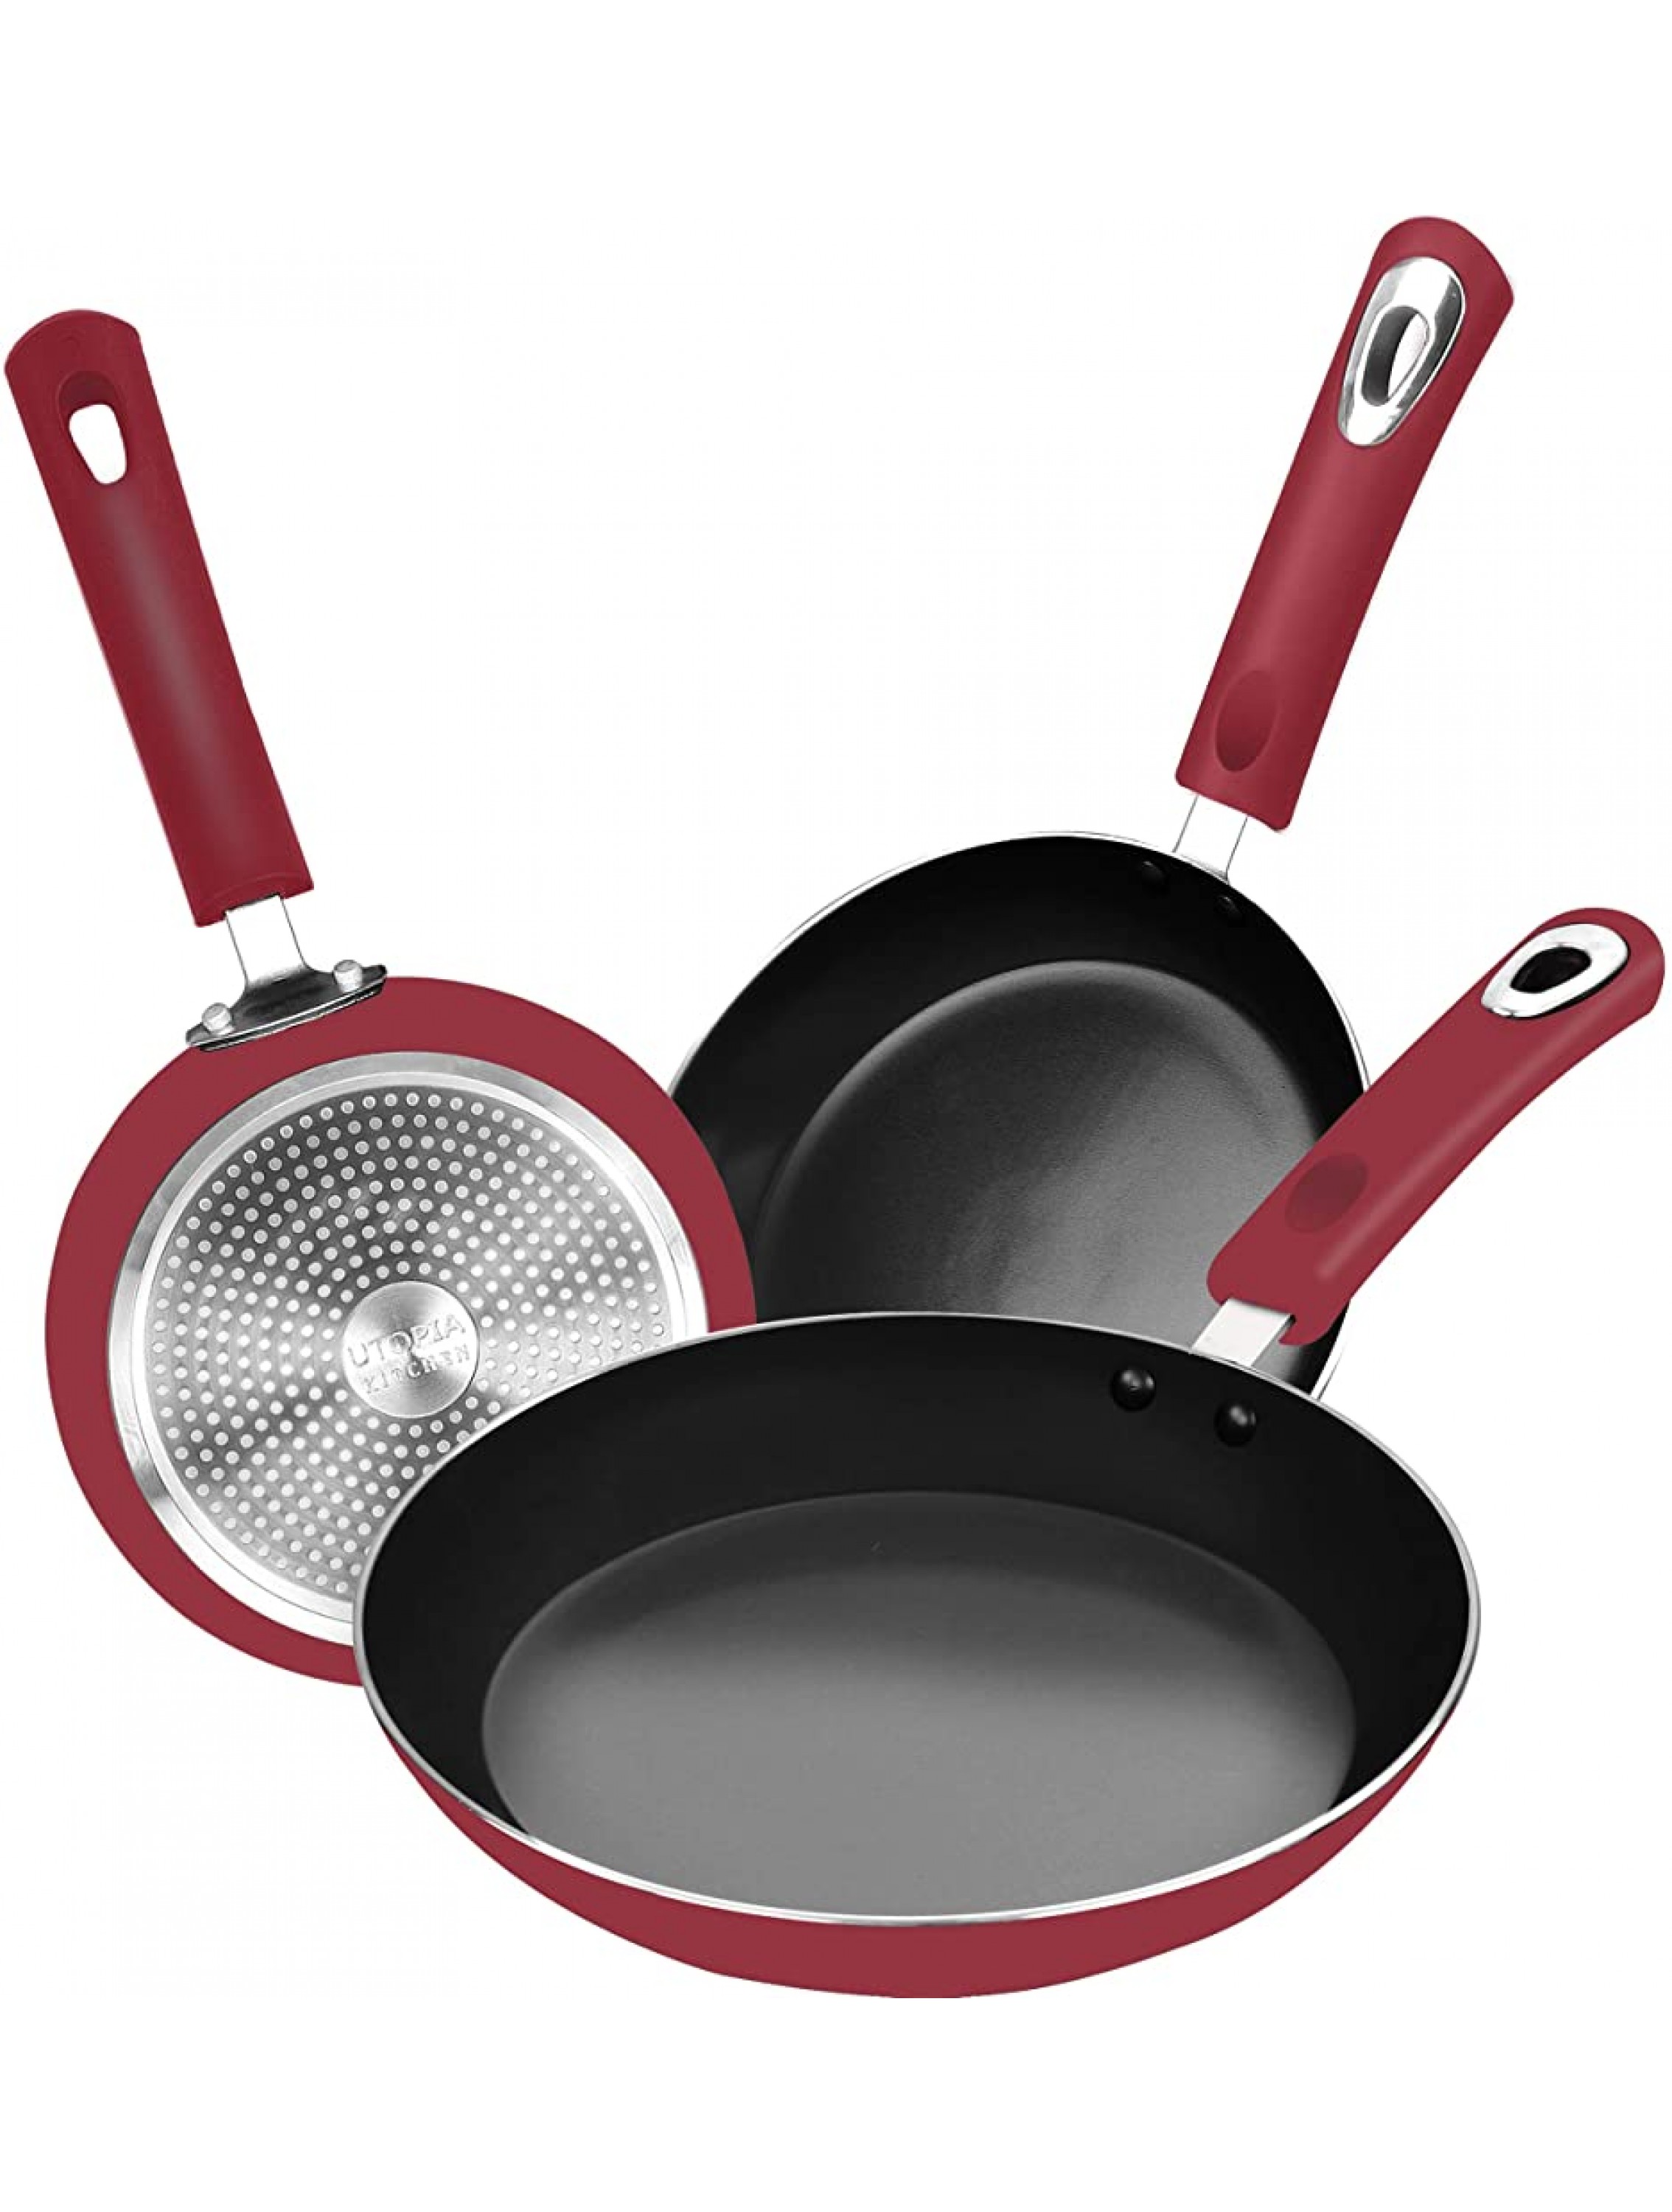 Utopia Kitchen Nonstick Frying Pan Set 3 Piece Induction Bottom 8 Inches 9.5 Inches and 11 Inches Red-Black - BXH8MYCT4